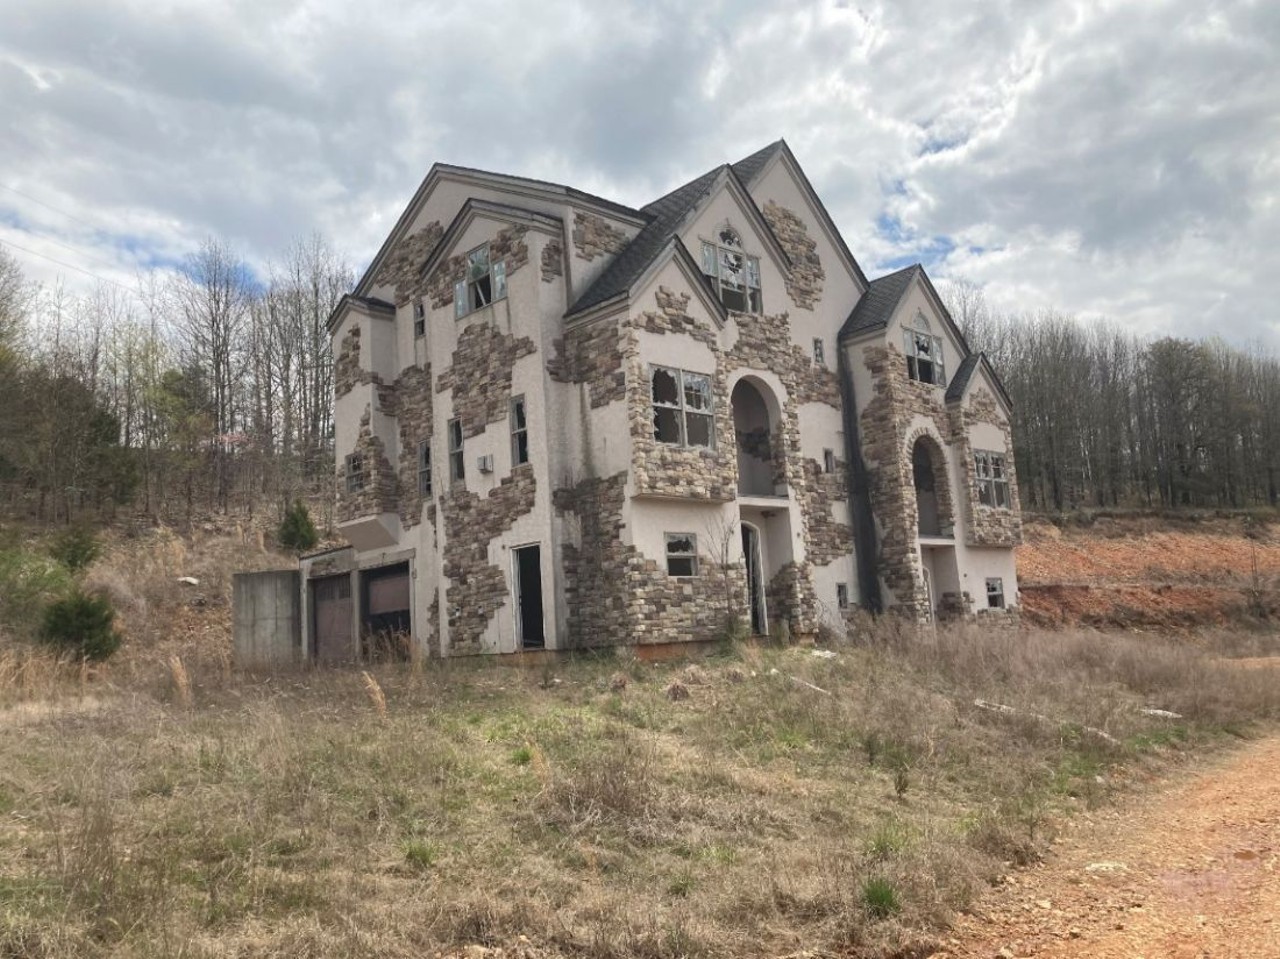 These Abandoned Mansions in Branson Are Going Viral on TikTok [PHOTOS]